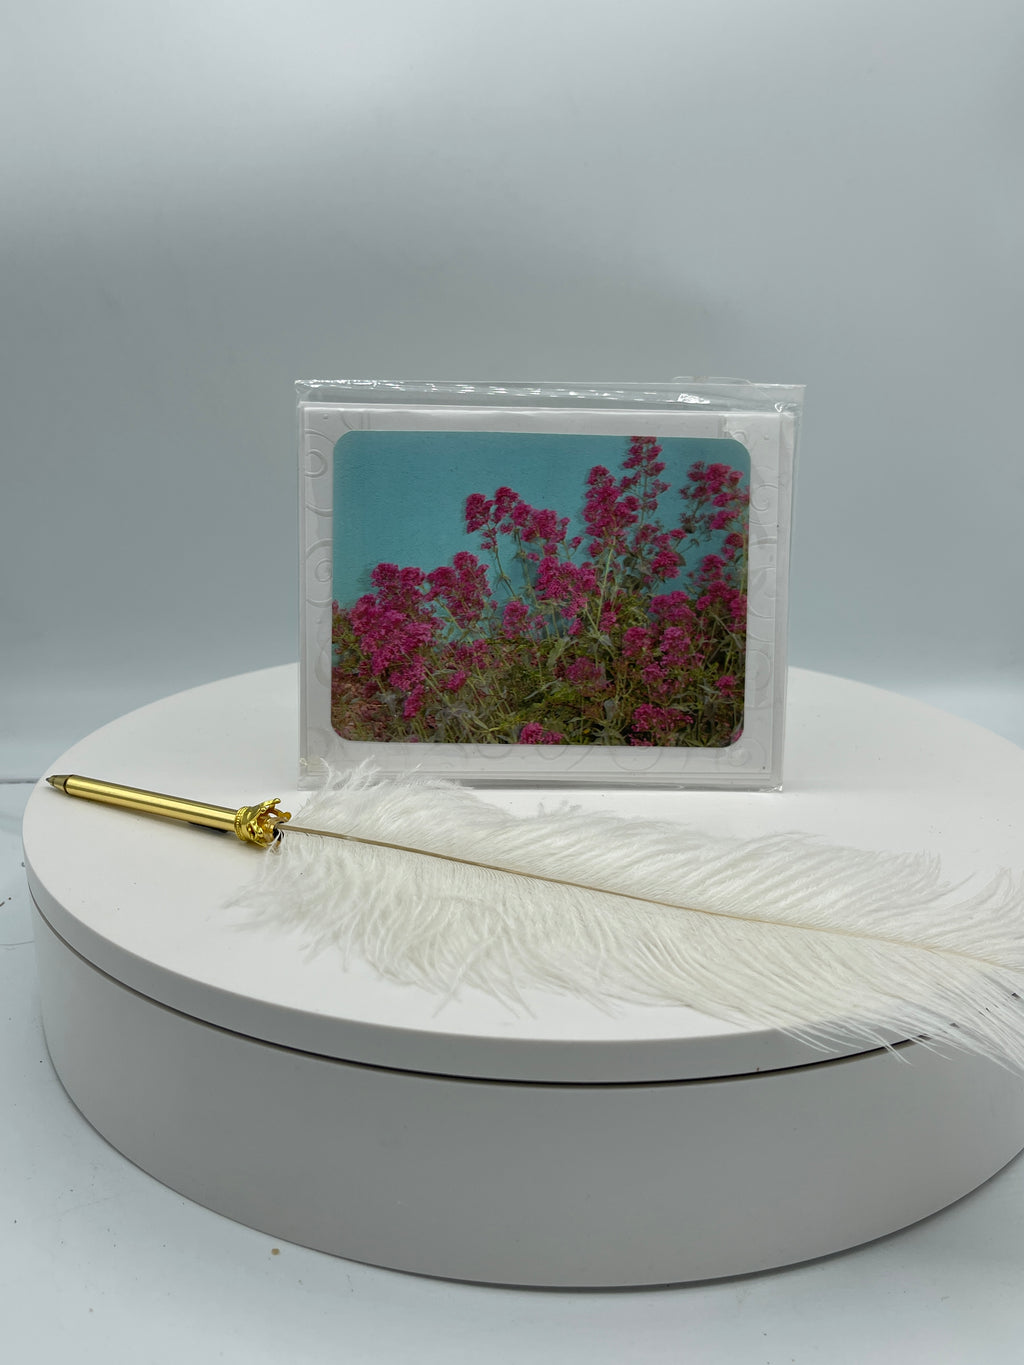 Red Valerian on Turquoise Wall